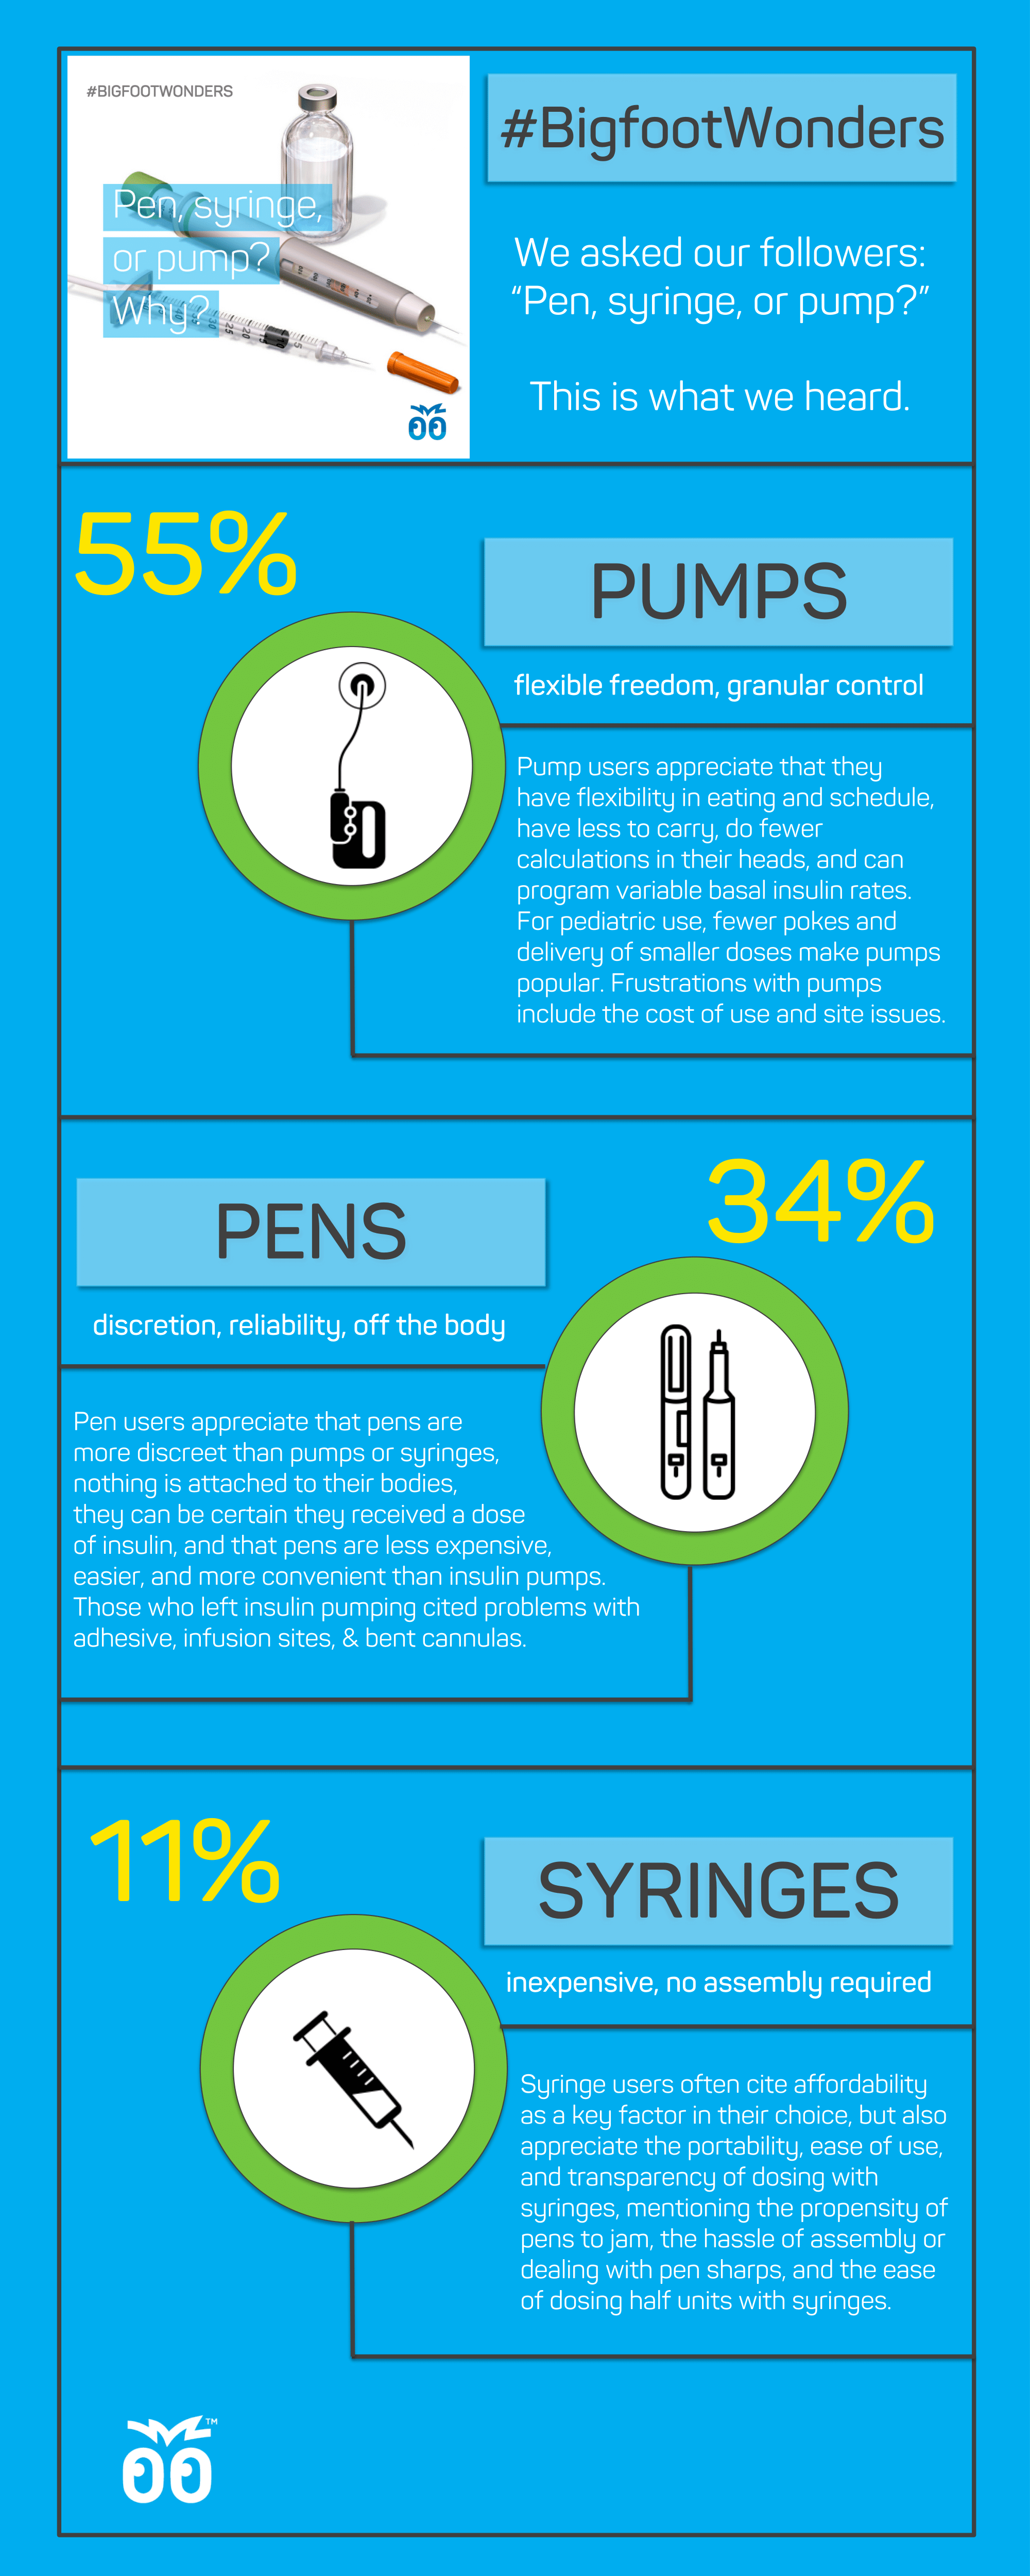 We asked our followers with insulin-requiring diabetes whether they prefer to use an insulin pump, an insulin pen, or a syringe to dose their insulin. Of approximately 300 respondents, 55% said that insulin pumps provide them with flexible freedom and granular control. 34% of respondents said they use insulin pens because they provide them with discretion and reliability while being worn off the body. 11% of respondents prefer syringes because they’re inexpensive with no assembly required.